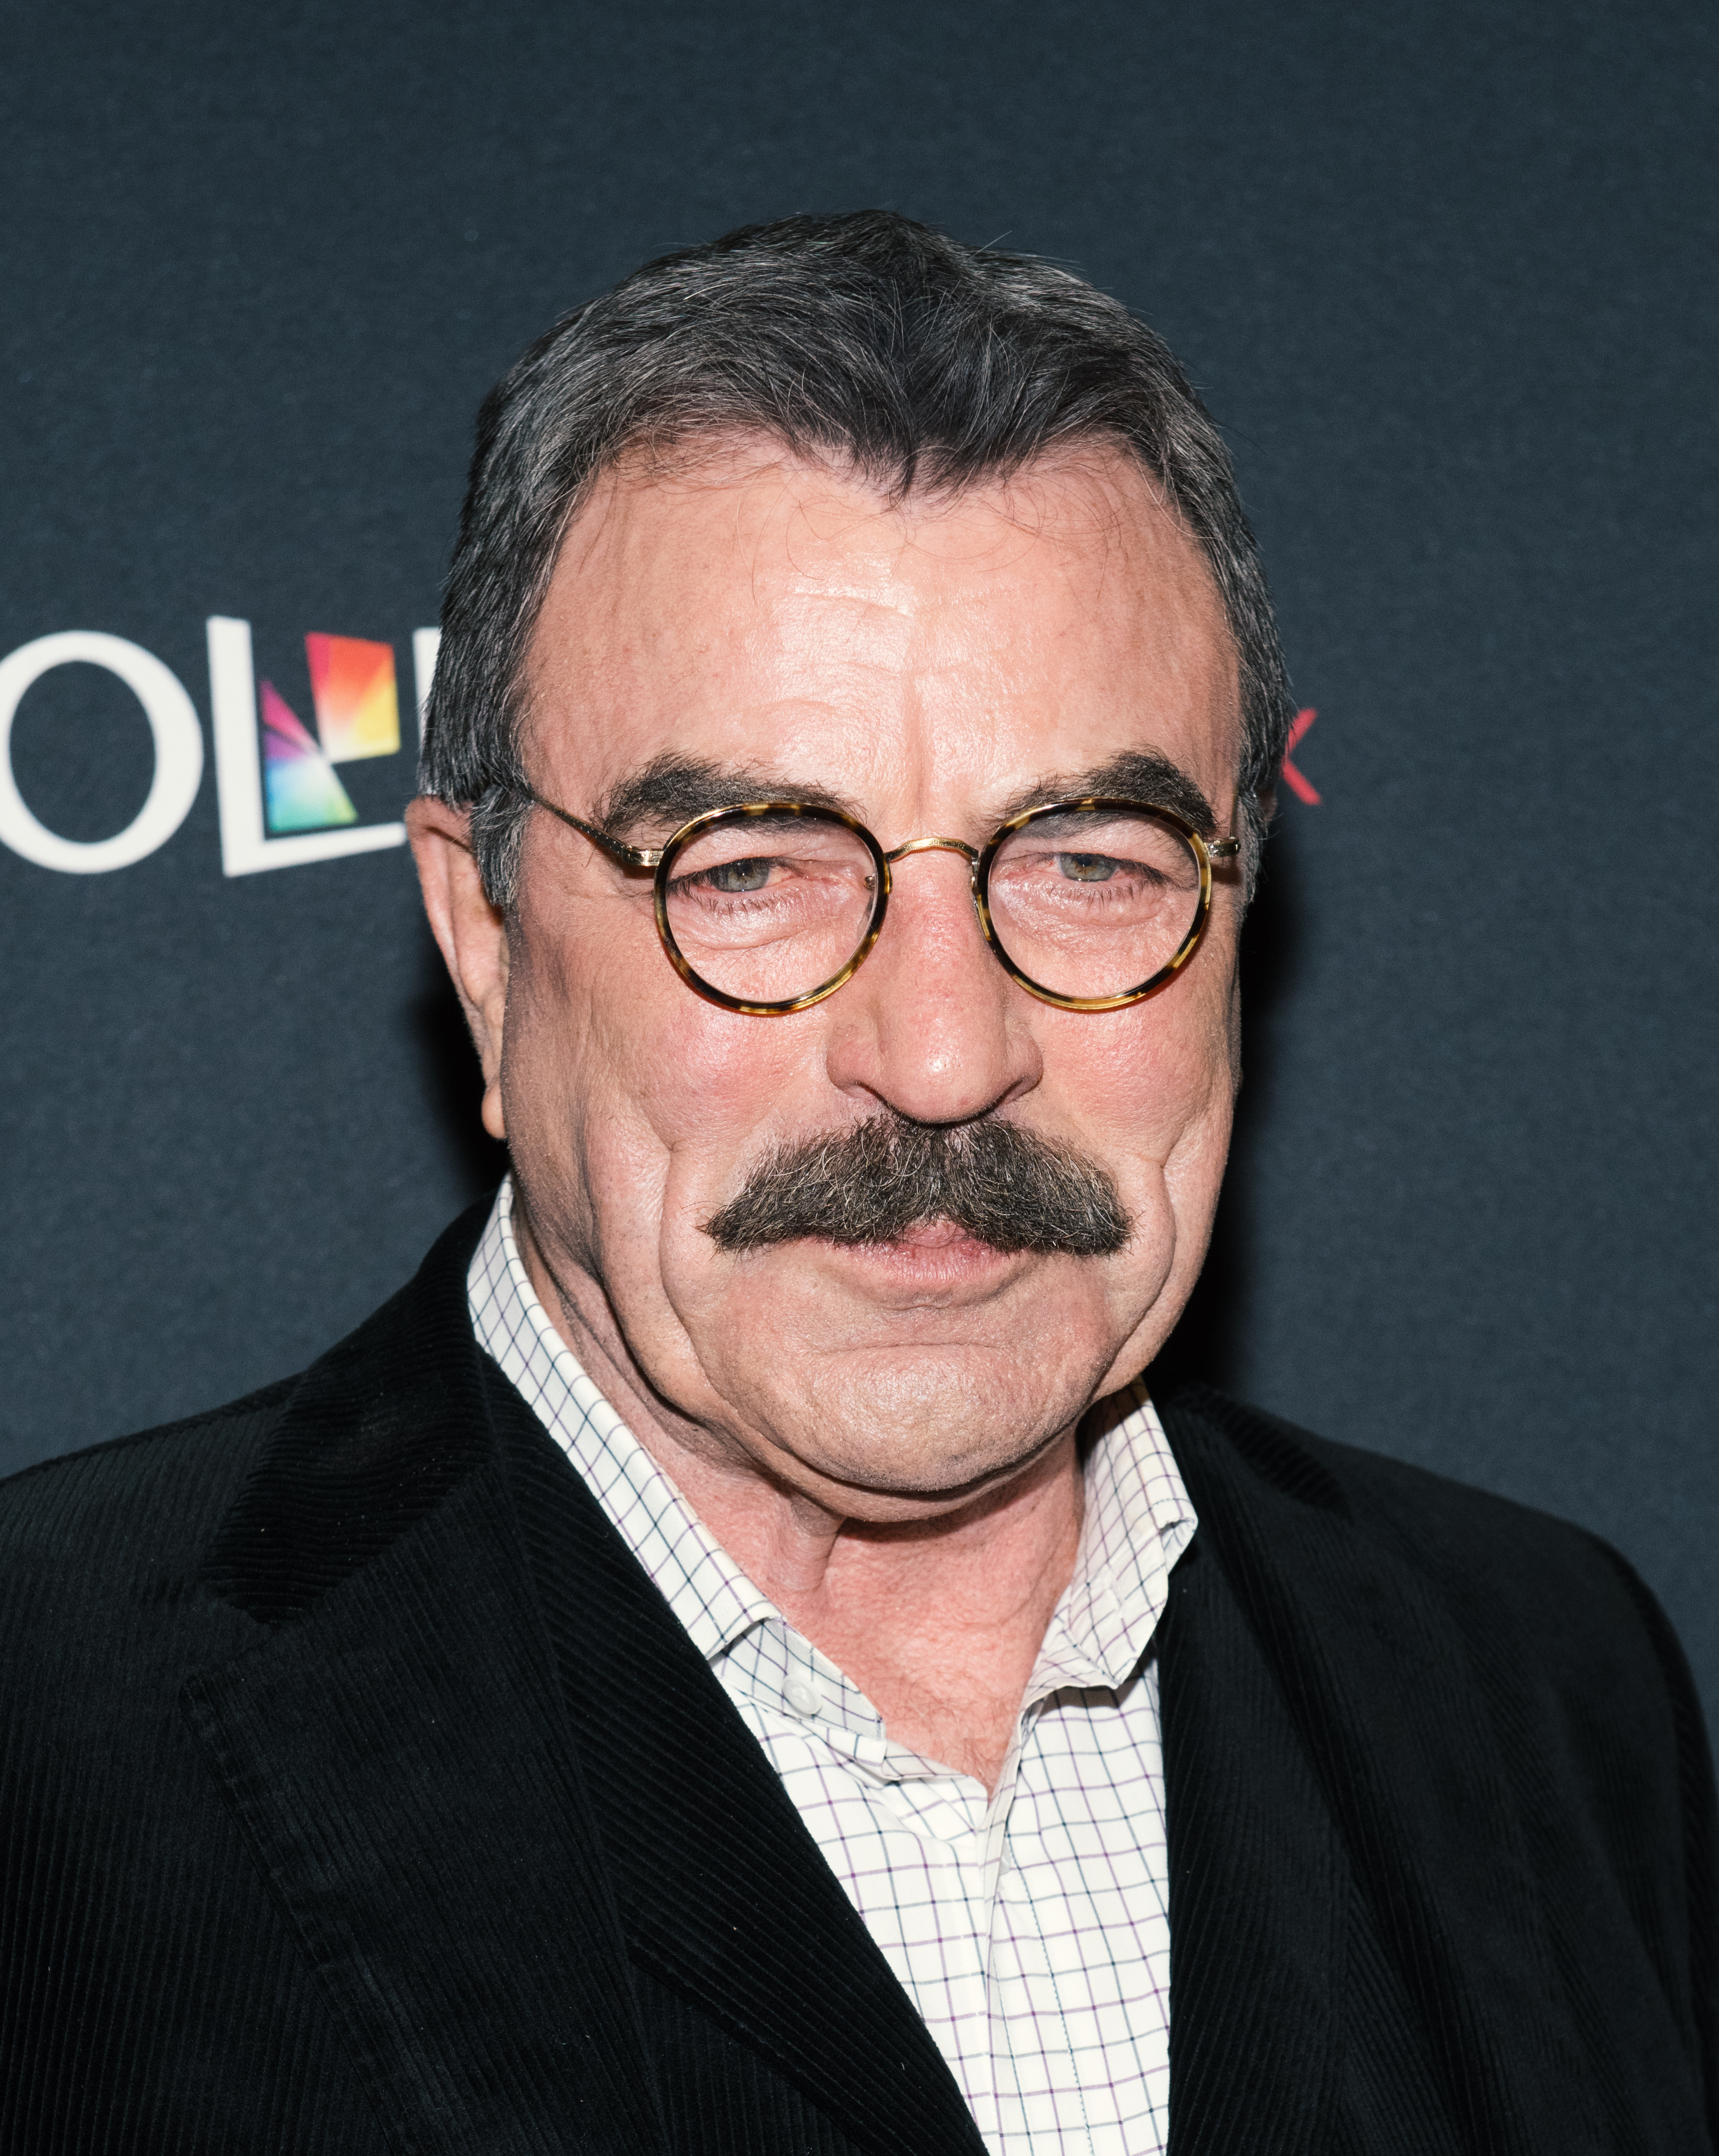 om Selleck attends the "Blue Bloods" screening during PaleyFest NY 2017 at The Paley Center for Media on October 16, 2017, in New York City | Source: Getty Images